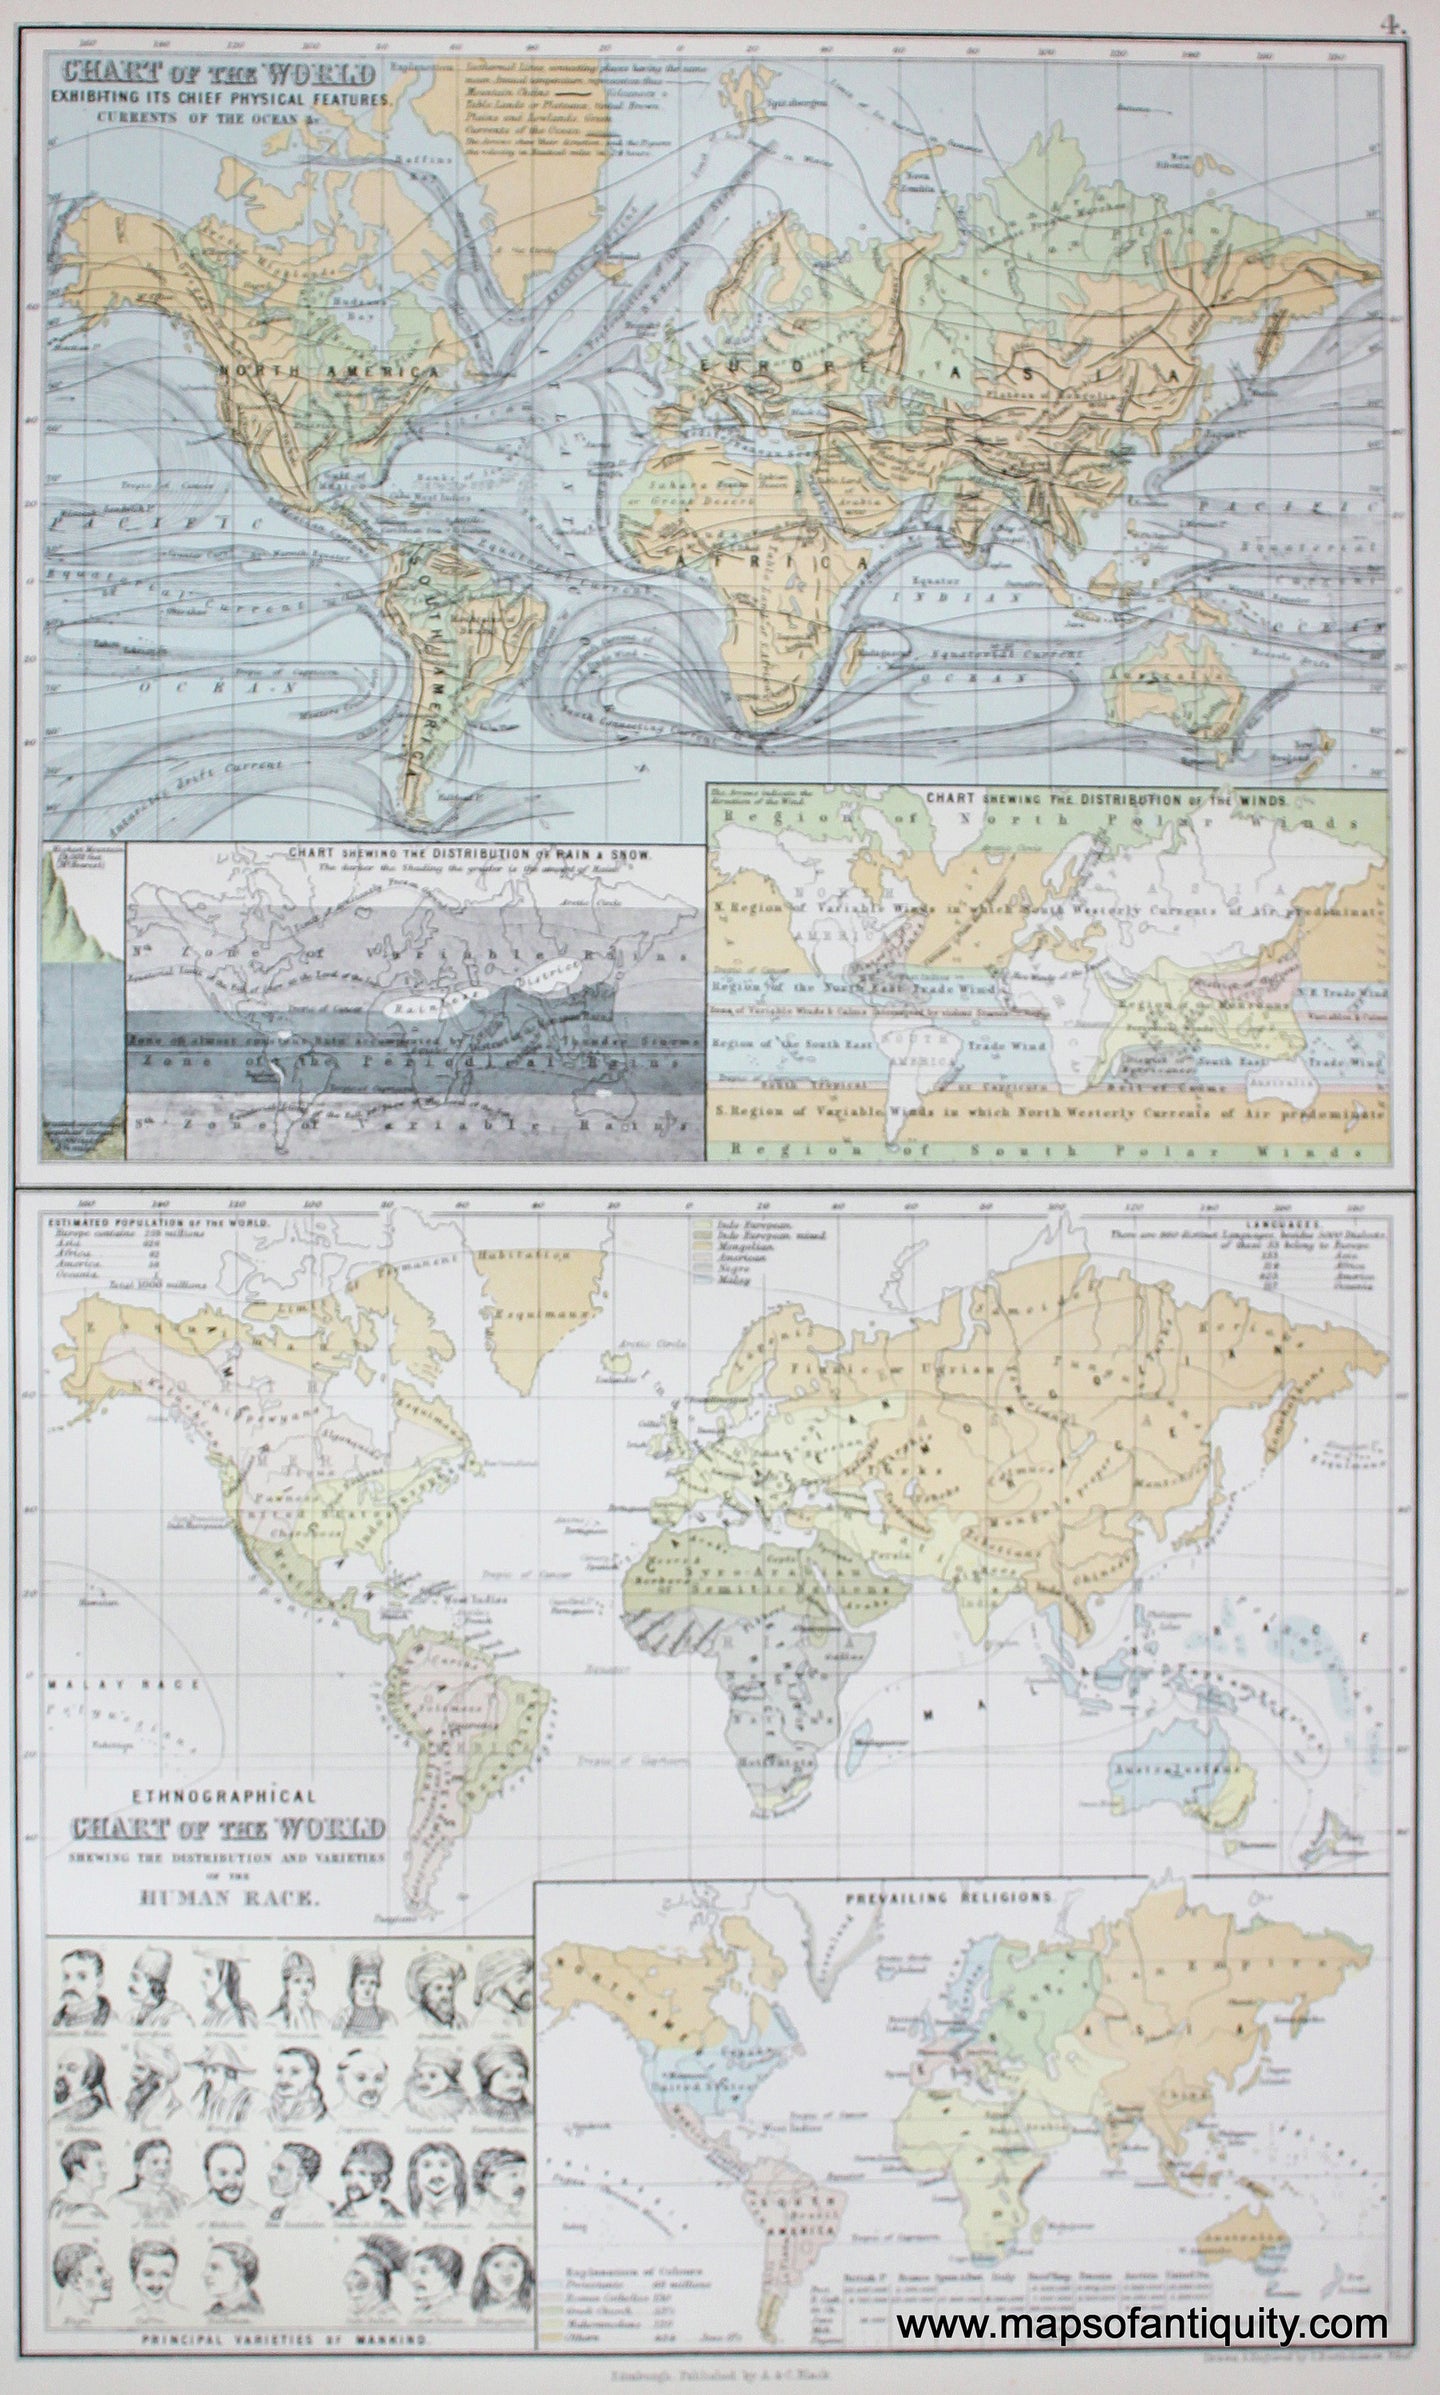 Antique-printed-color-Map-Chart-of-the-World-Exhibiting-its-Chief-Physical-Features-and-Ethnographical-Chart-of-the-World-World--1879-Black-Maps-Of-Antiquity